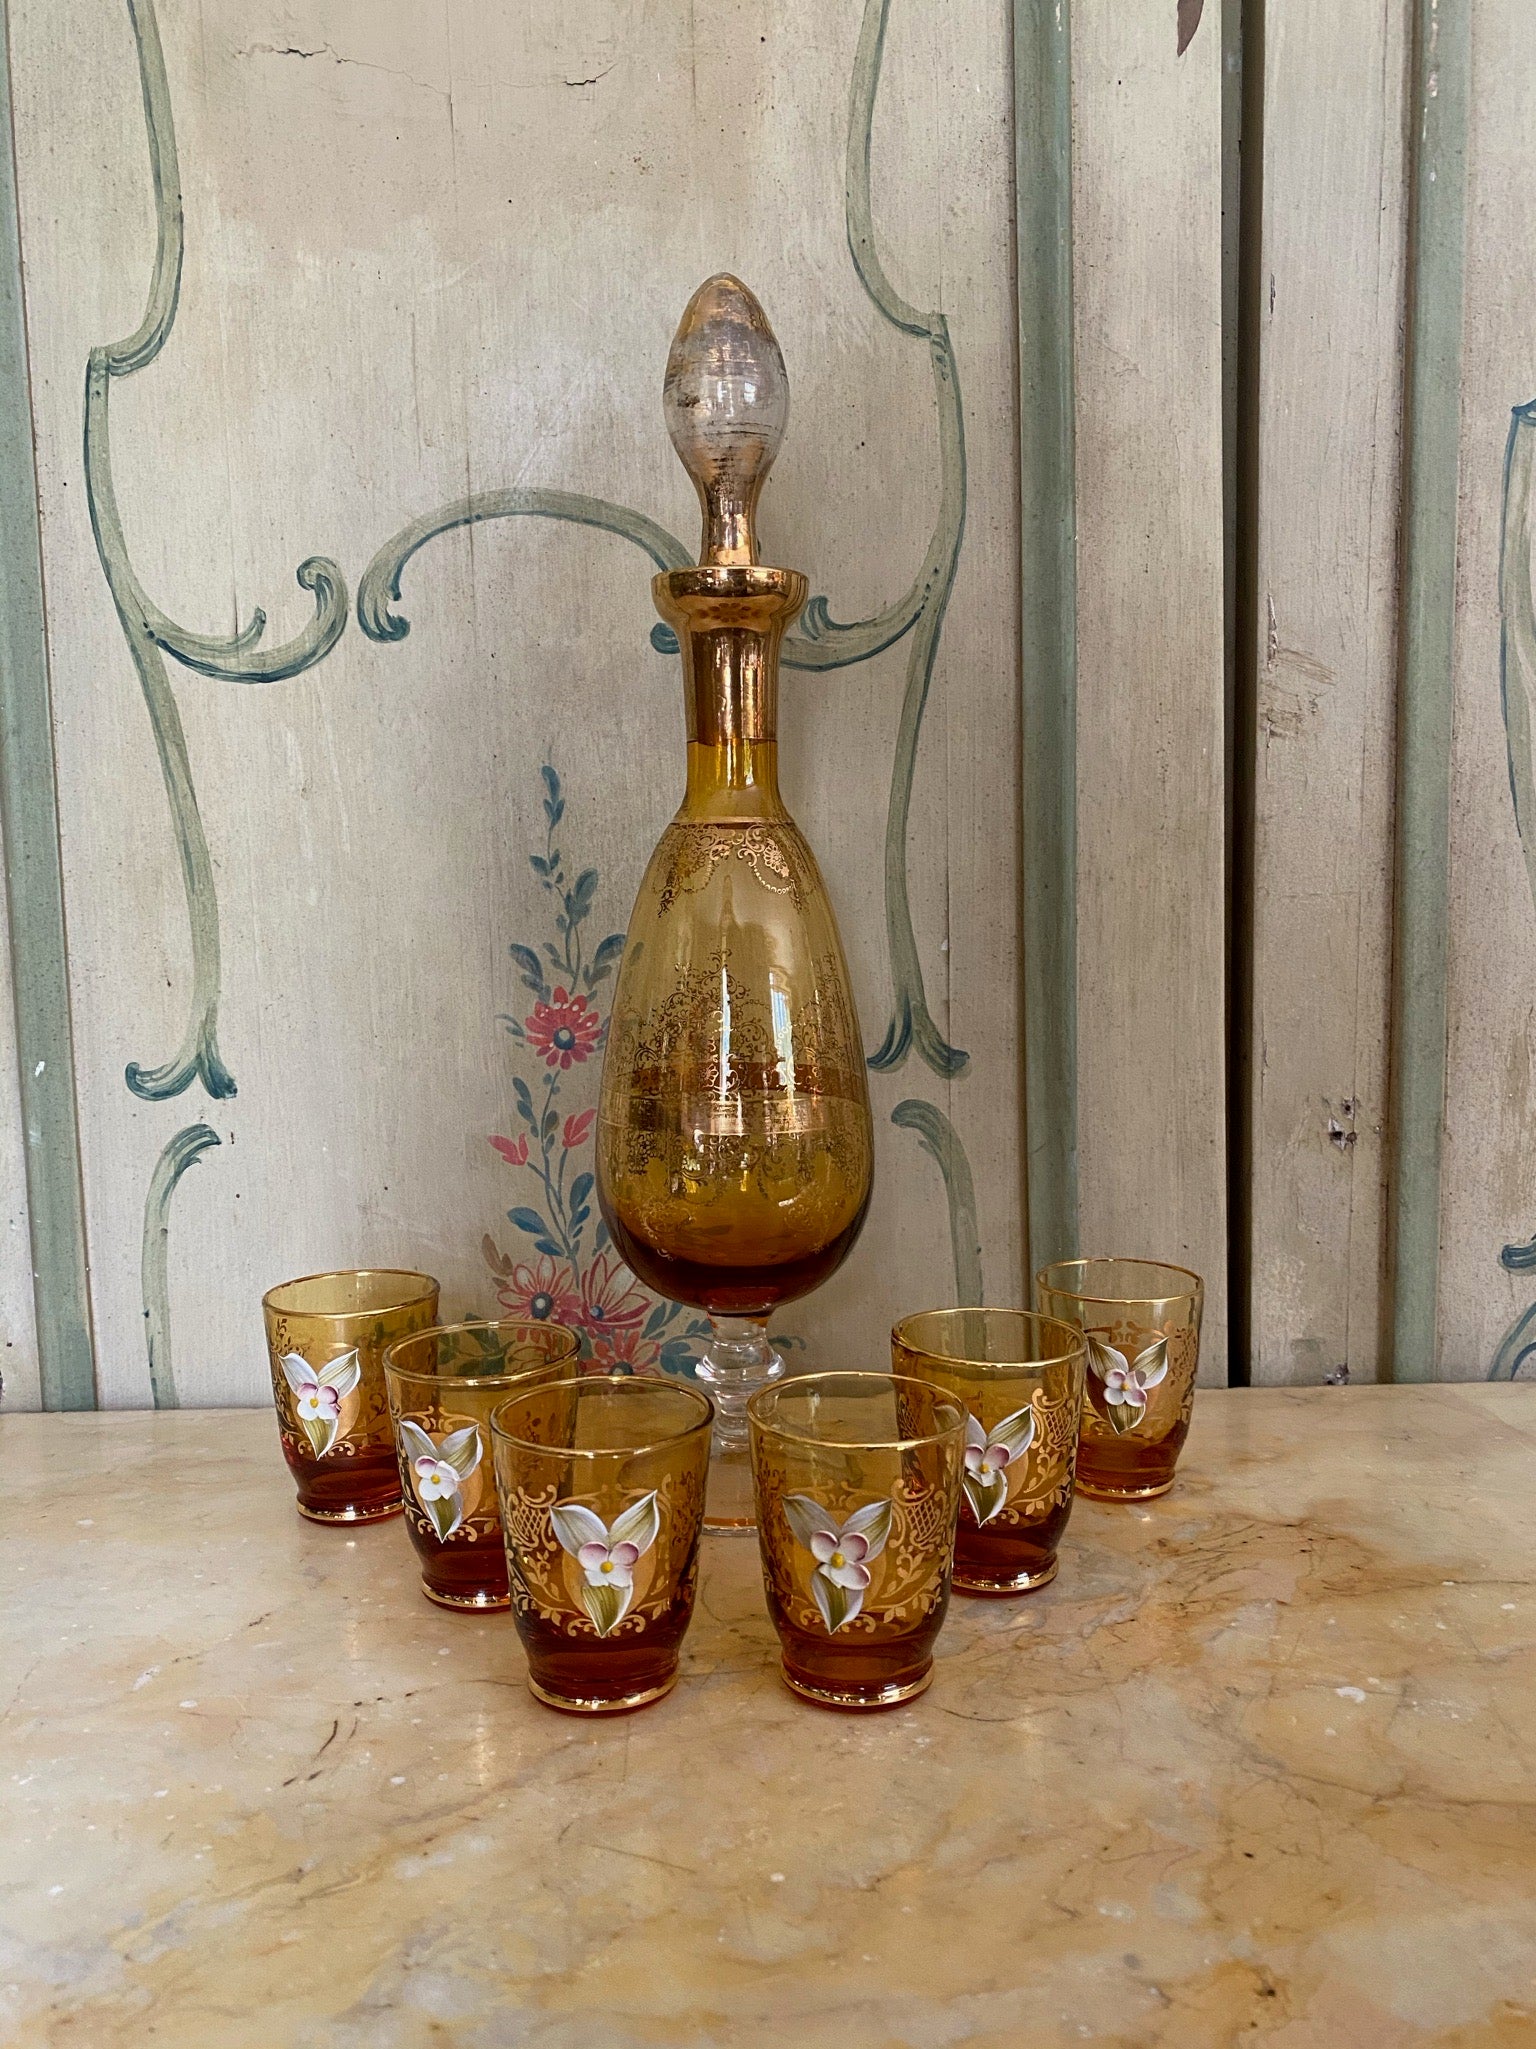 Amber Mid Century Moroccan Style Decanter & Liqueur GlassesAmber Mid Century Moroccan Style Decanter & Liqueur Glasses